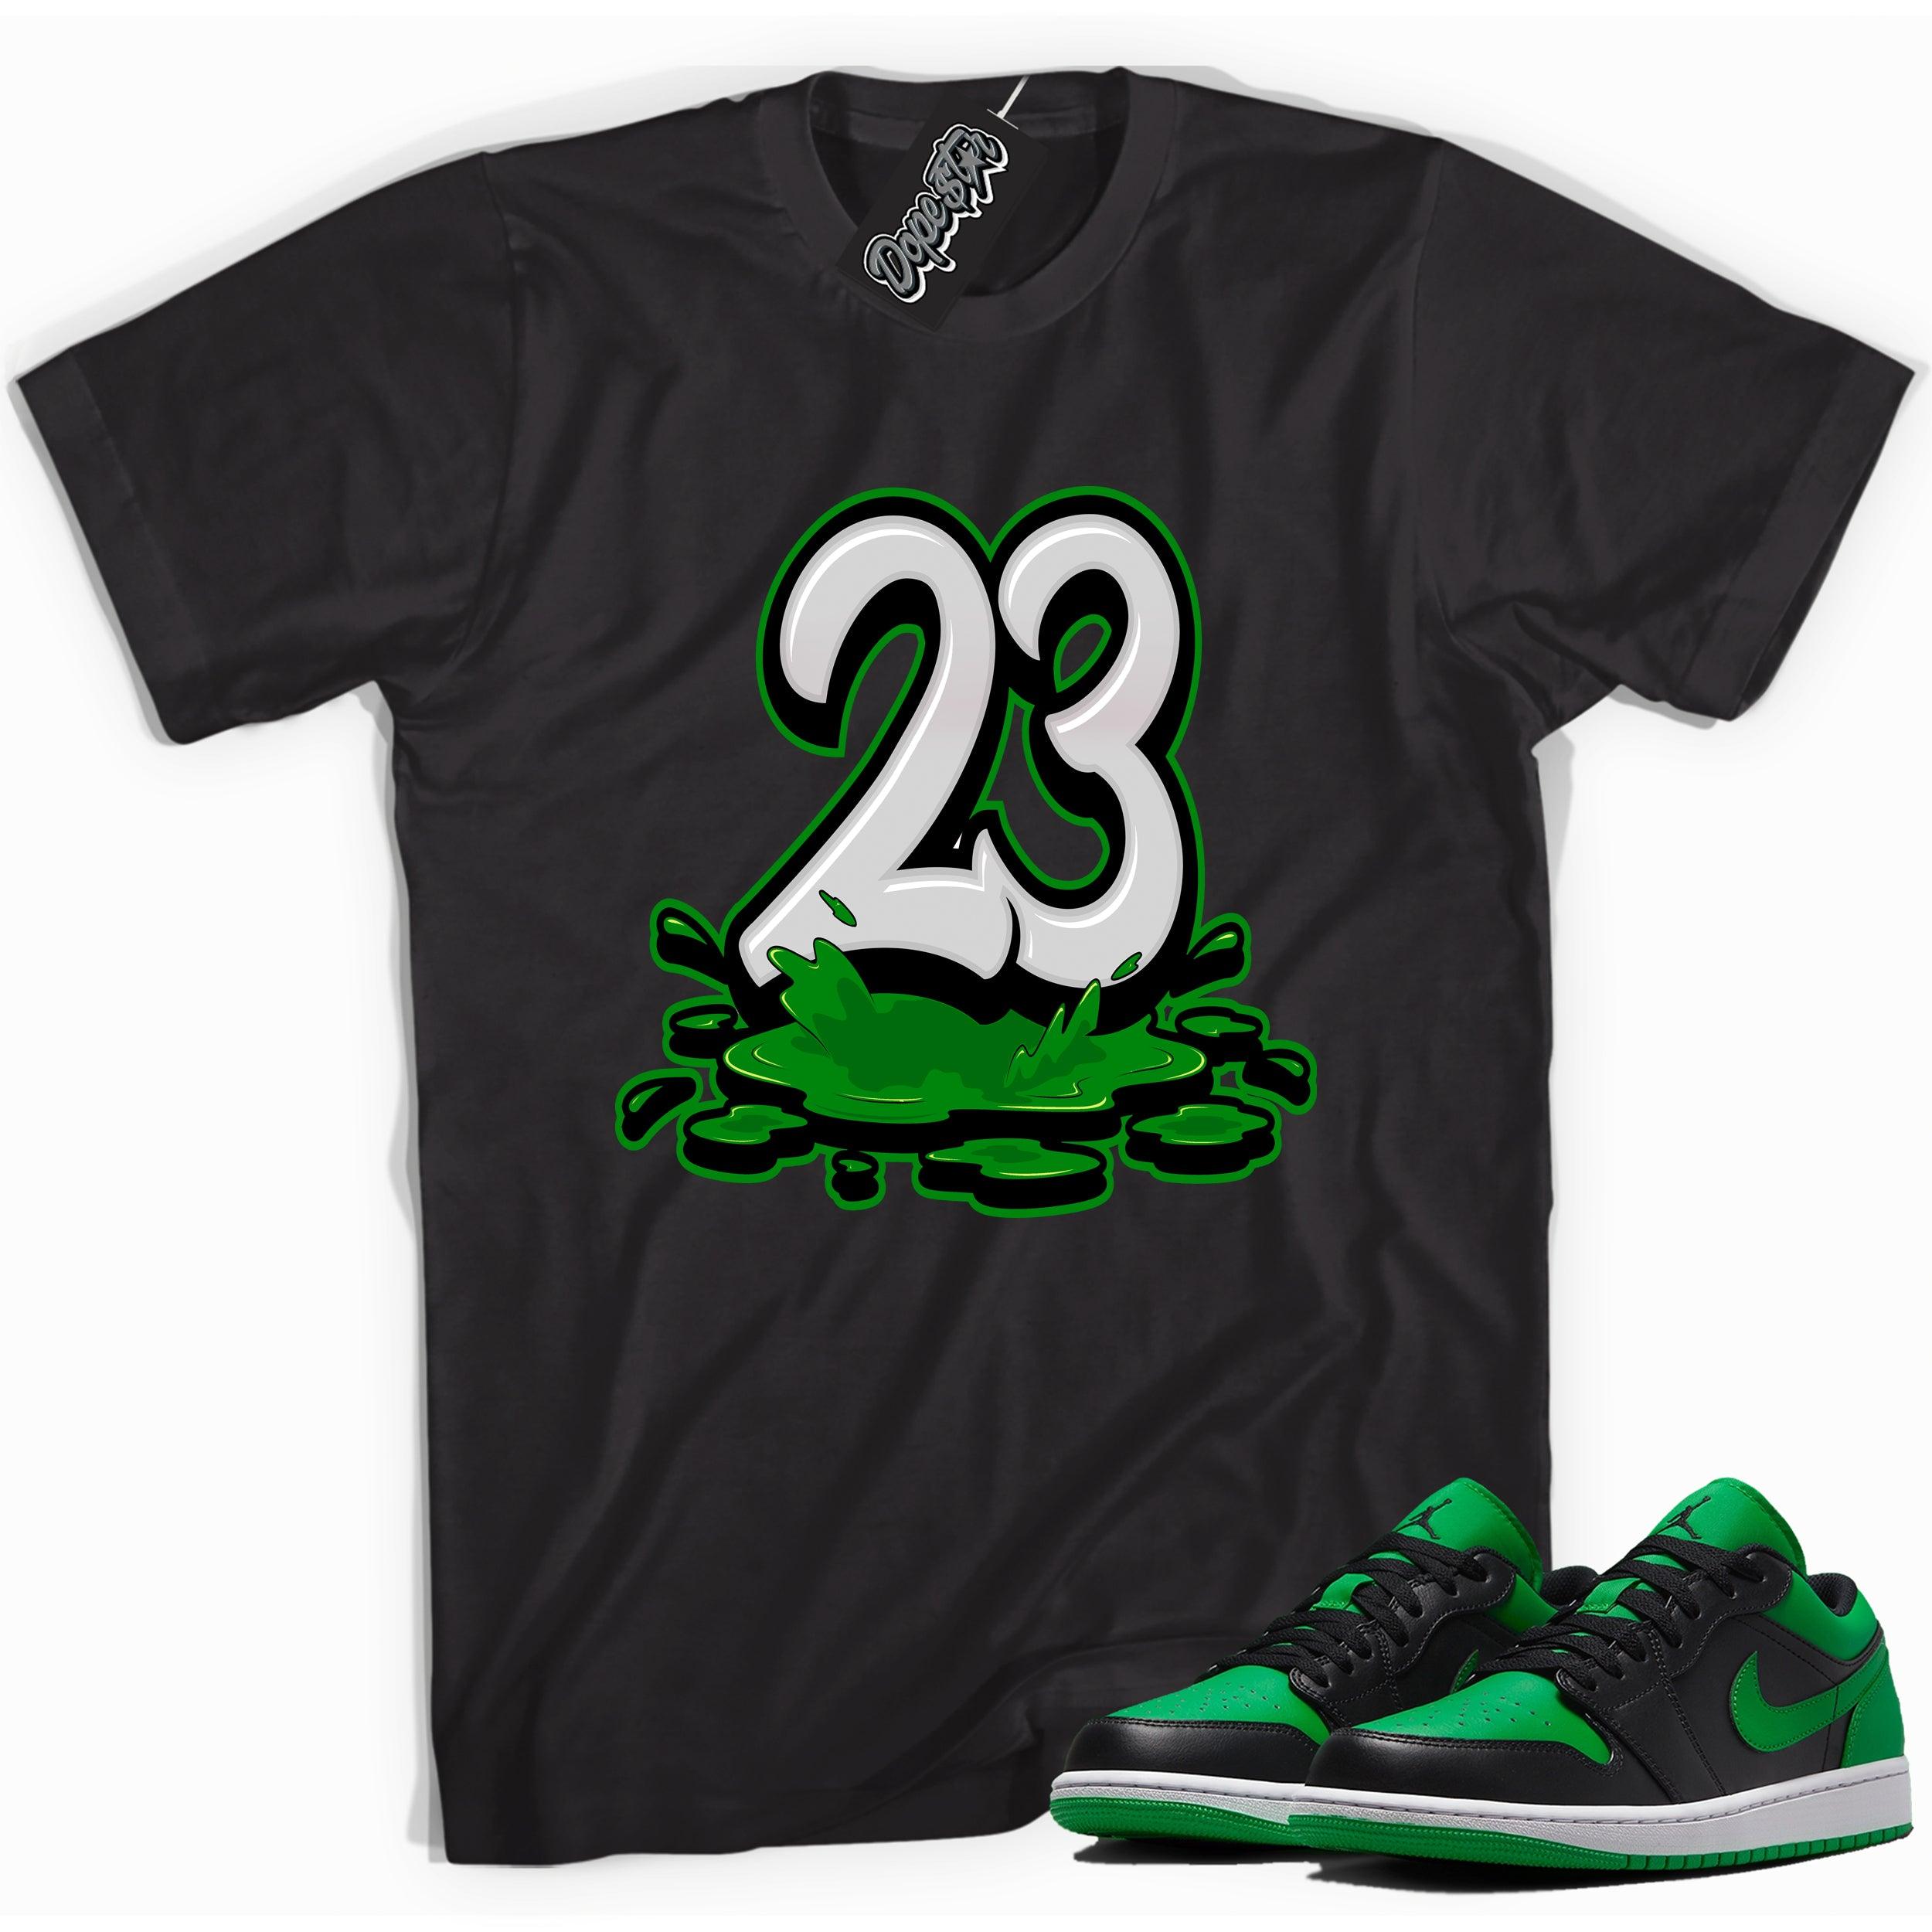 Cool black graphic tee with '23' print, that perfectly matches Air Jordan 1 Low Lucky Green sneakers